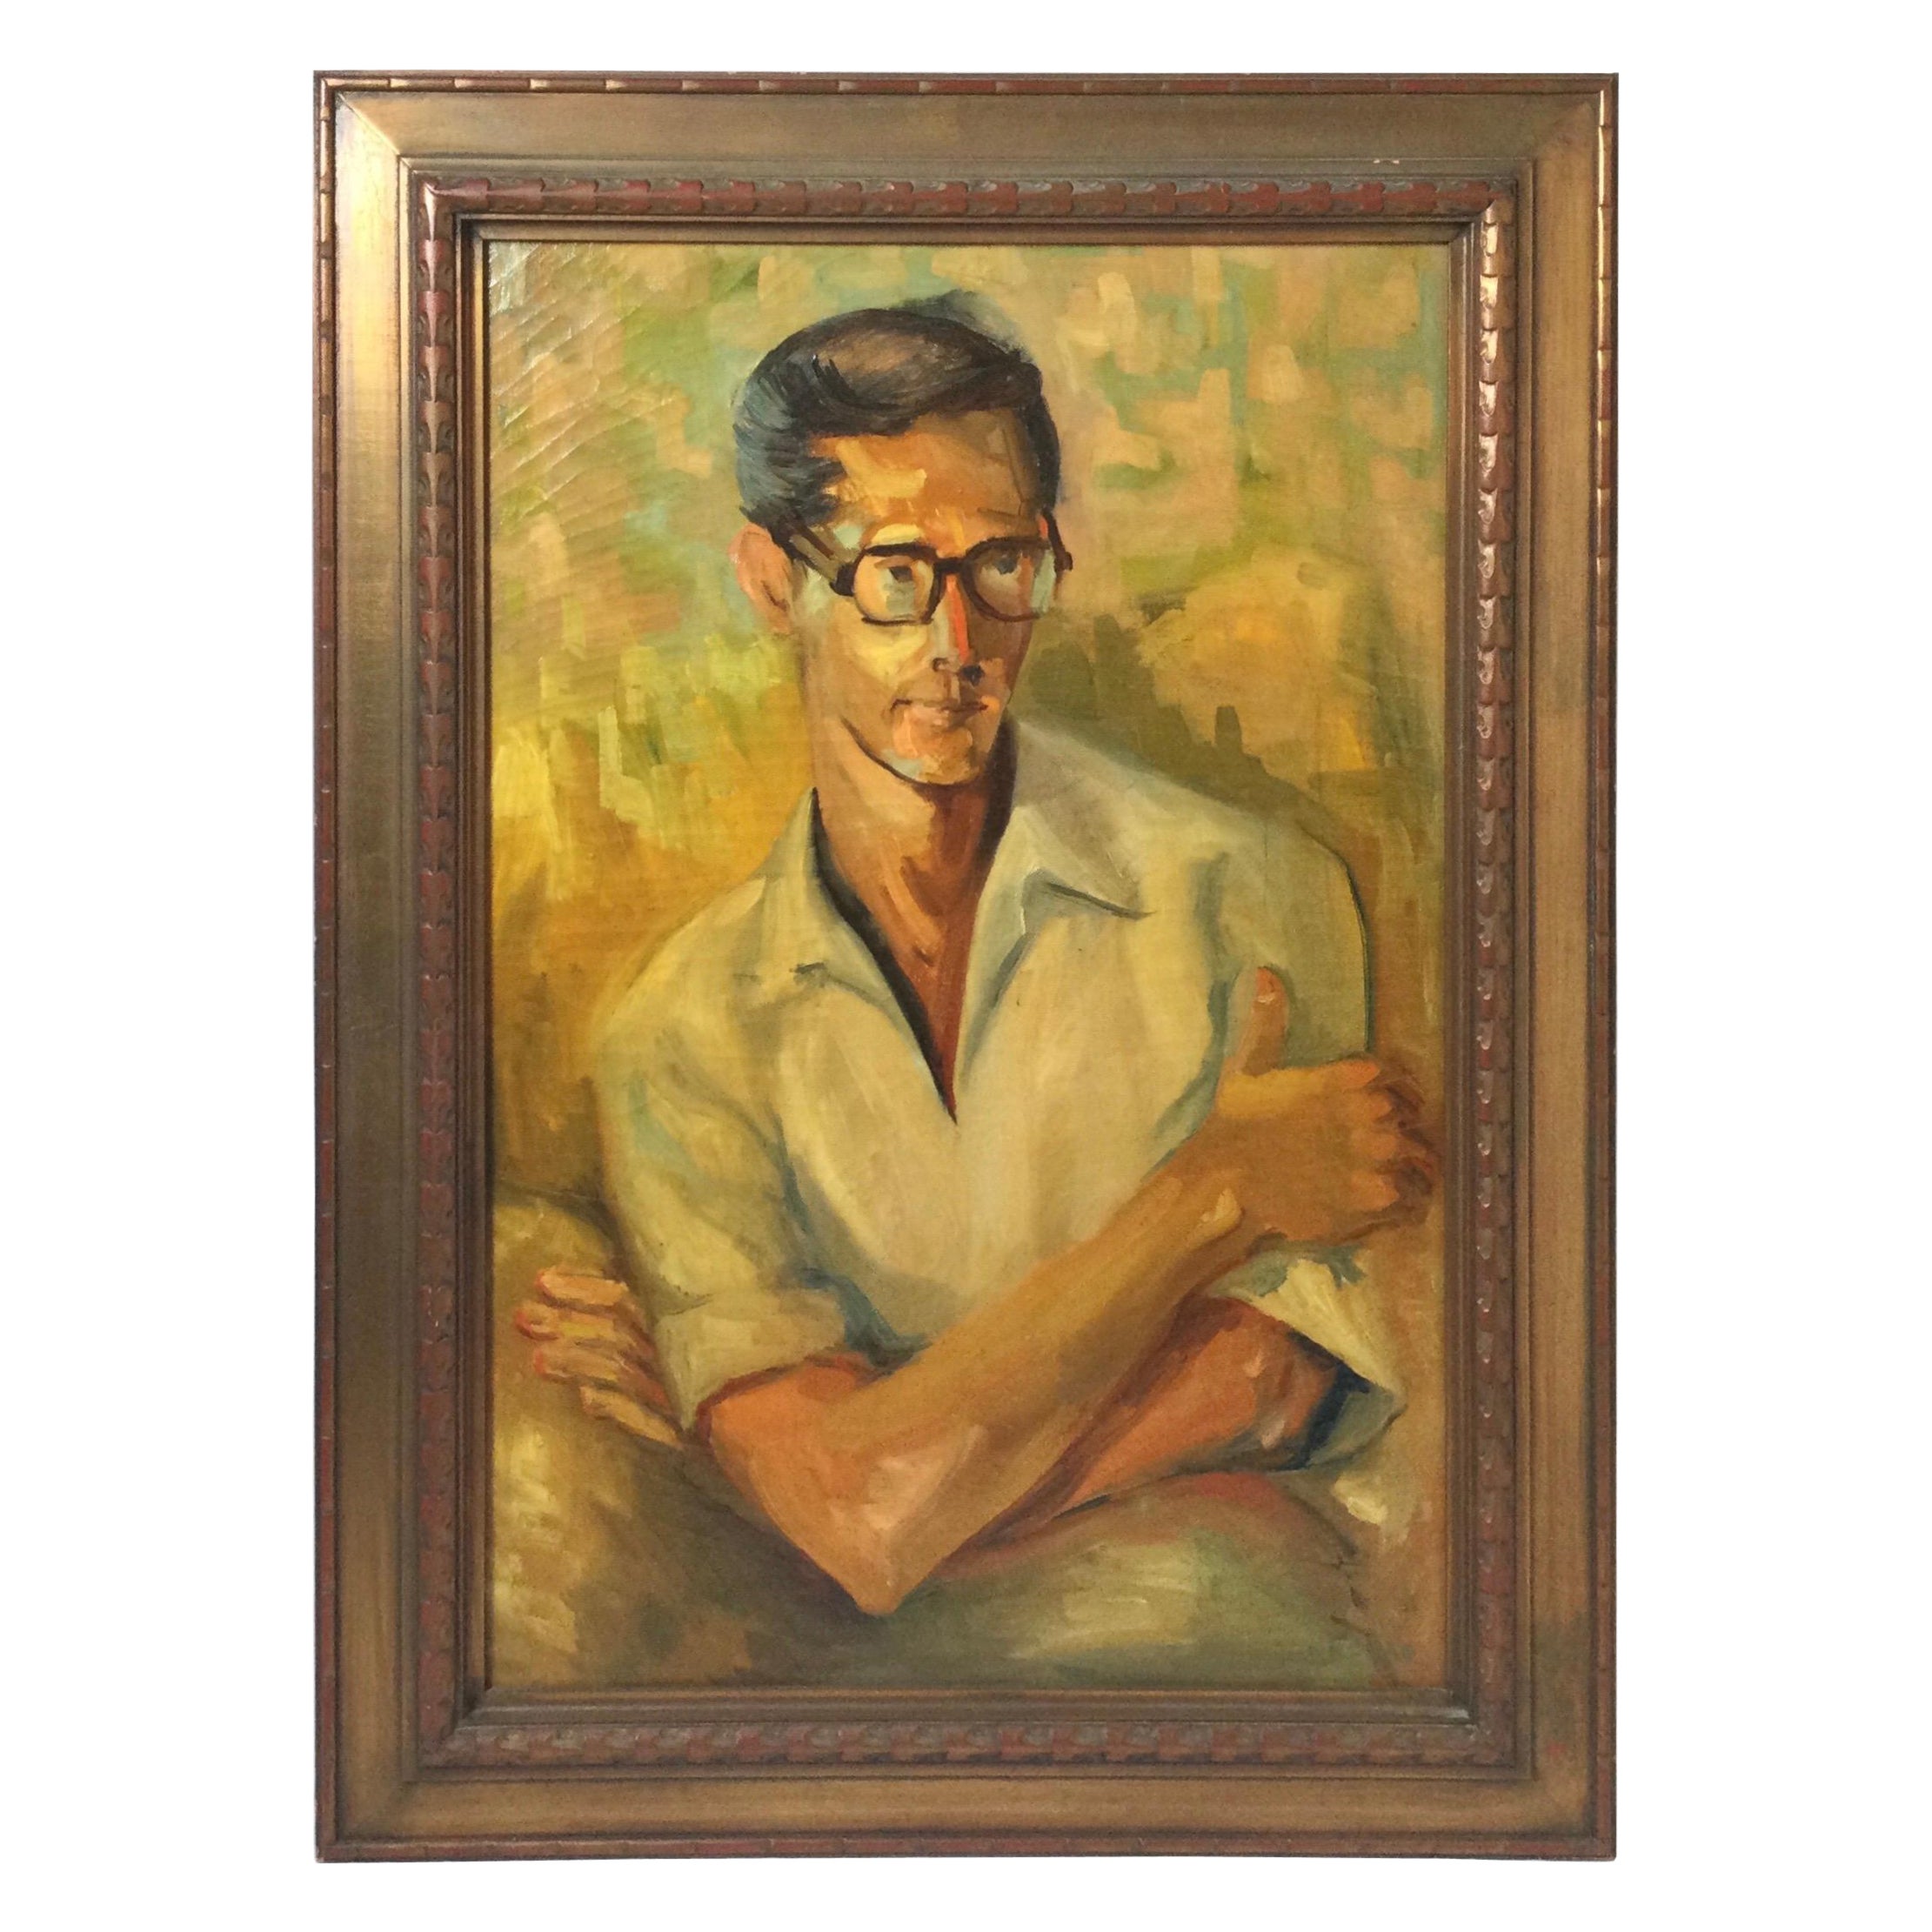 Oil Painting of a Young Man Framed and Signed